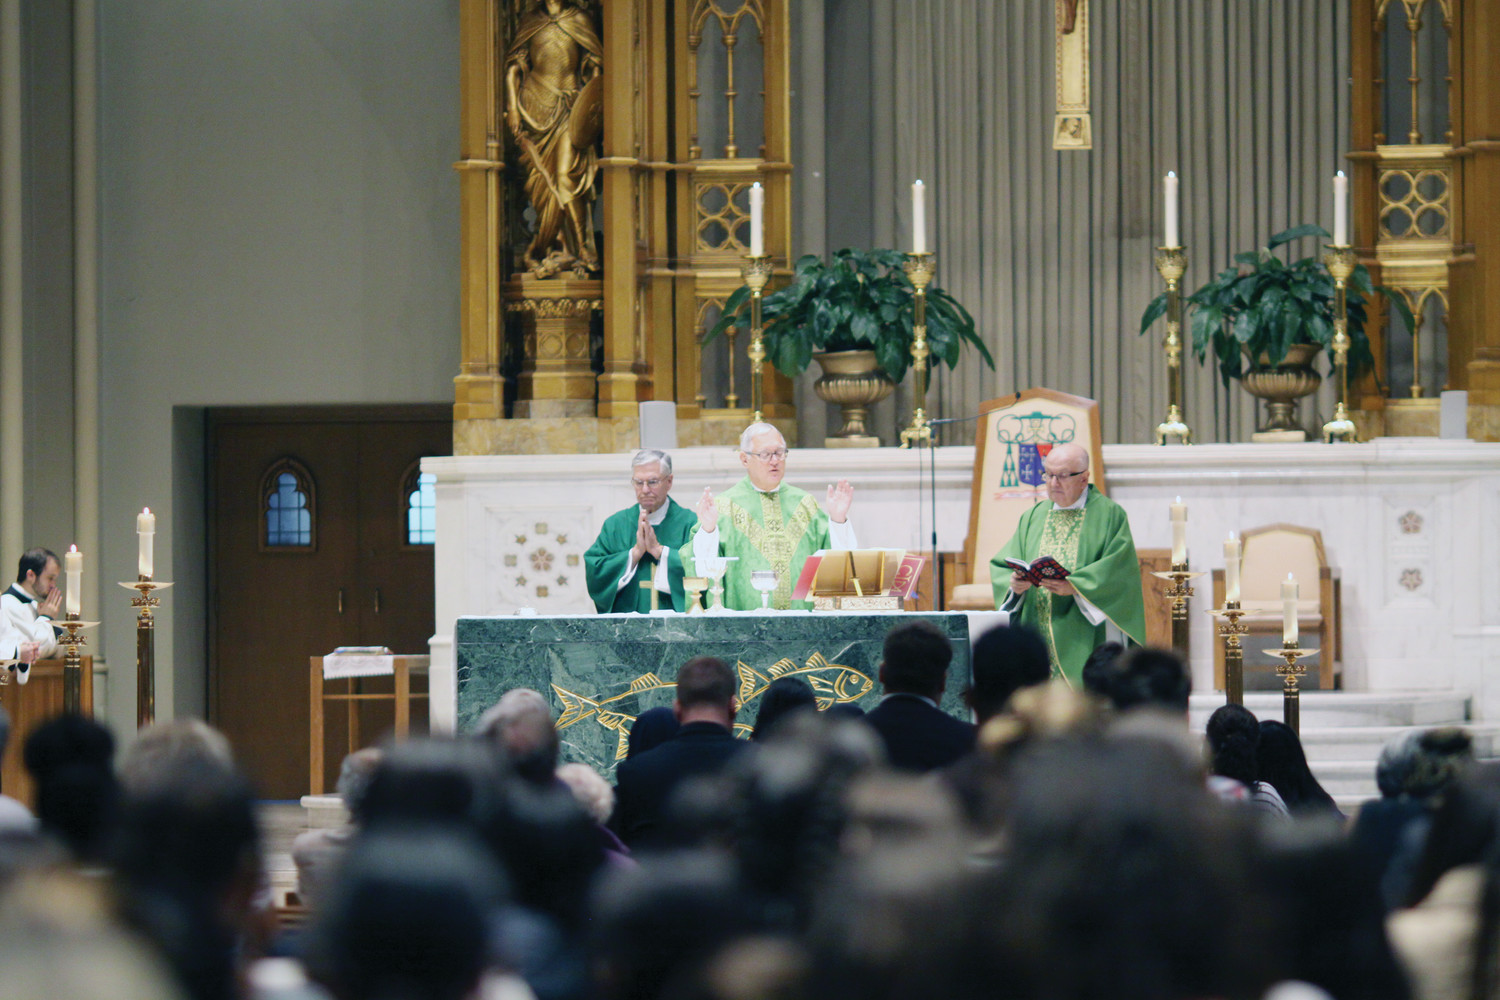 Bishop Thomas J. Tobin celebrated a Mass for those affected by recent tragedies at the Cathedral of Saints Peter and Paul on Sunday, October 15. “Our prayer reminds those who are suffering in the midst of their isolation and pain that they are not alone,” he said.